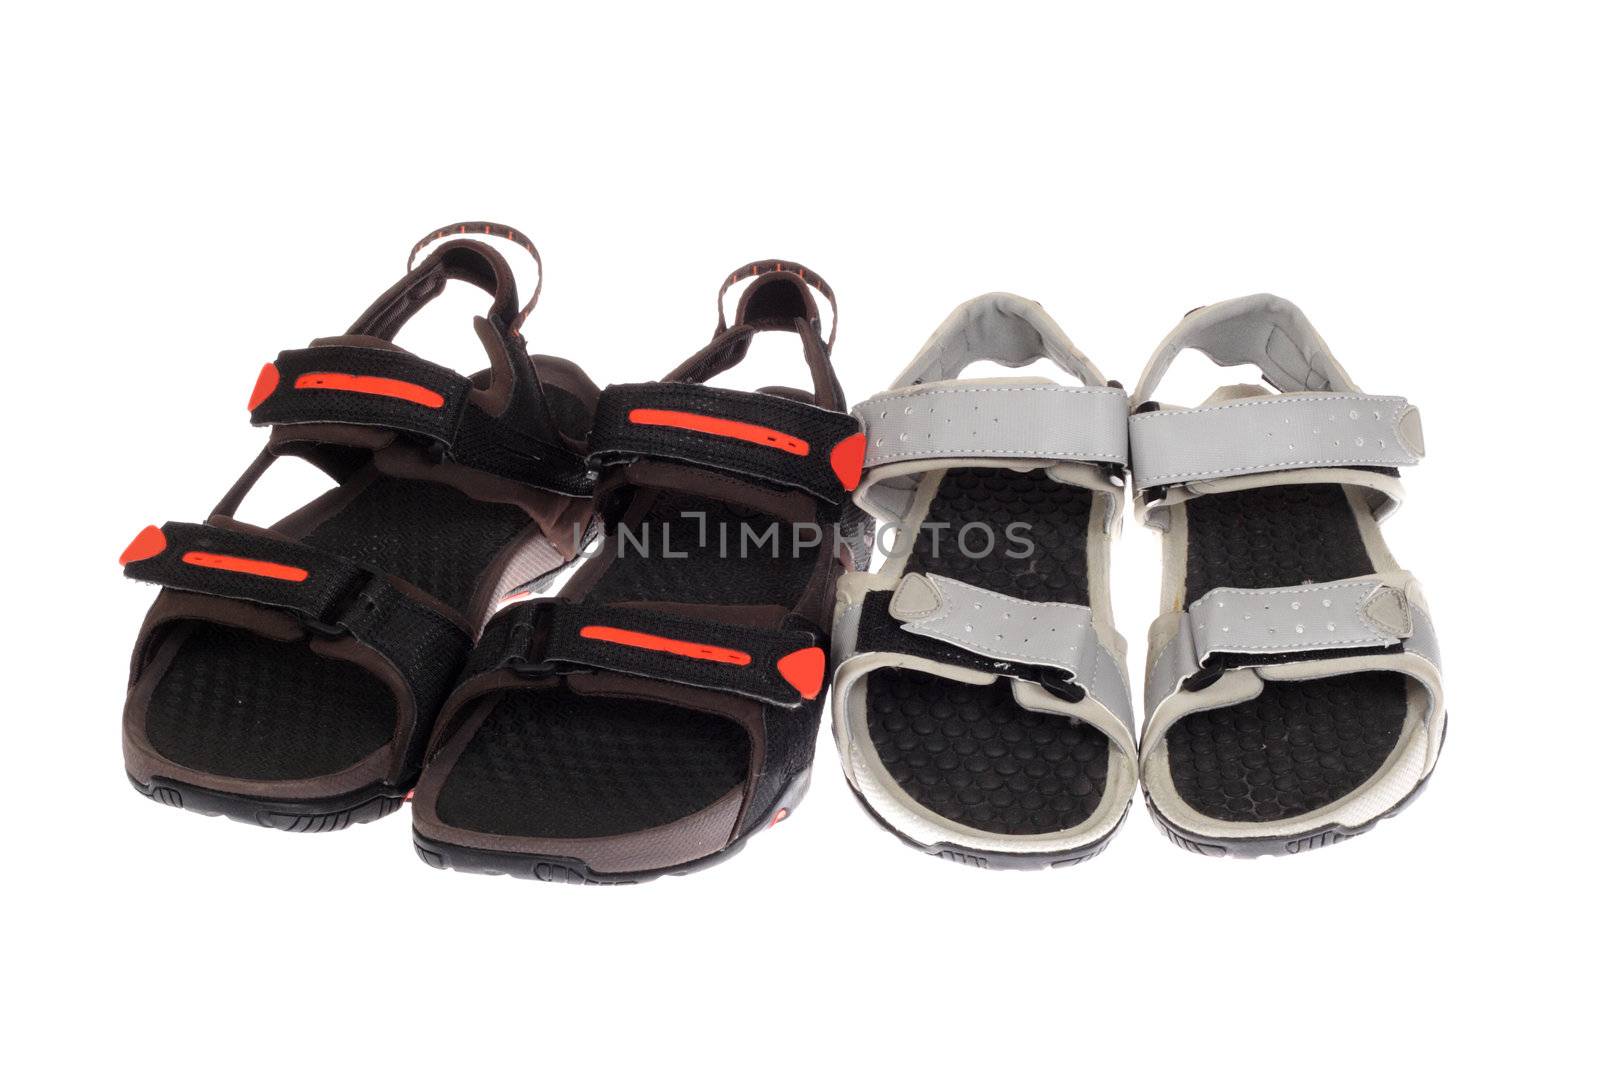 two pairs of sandals, photo on white